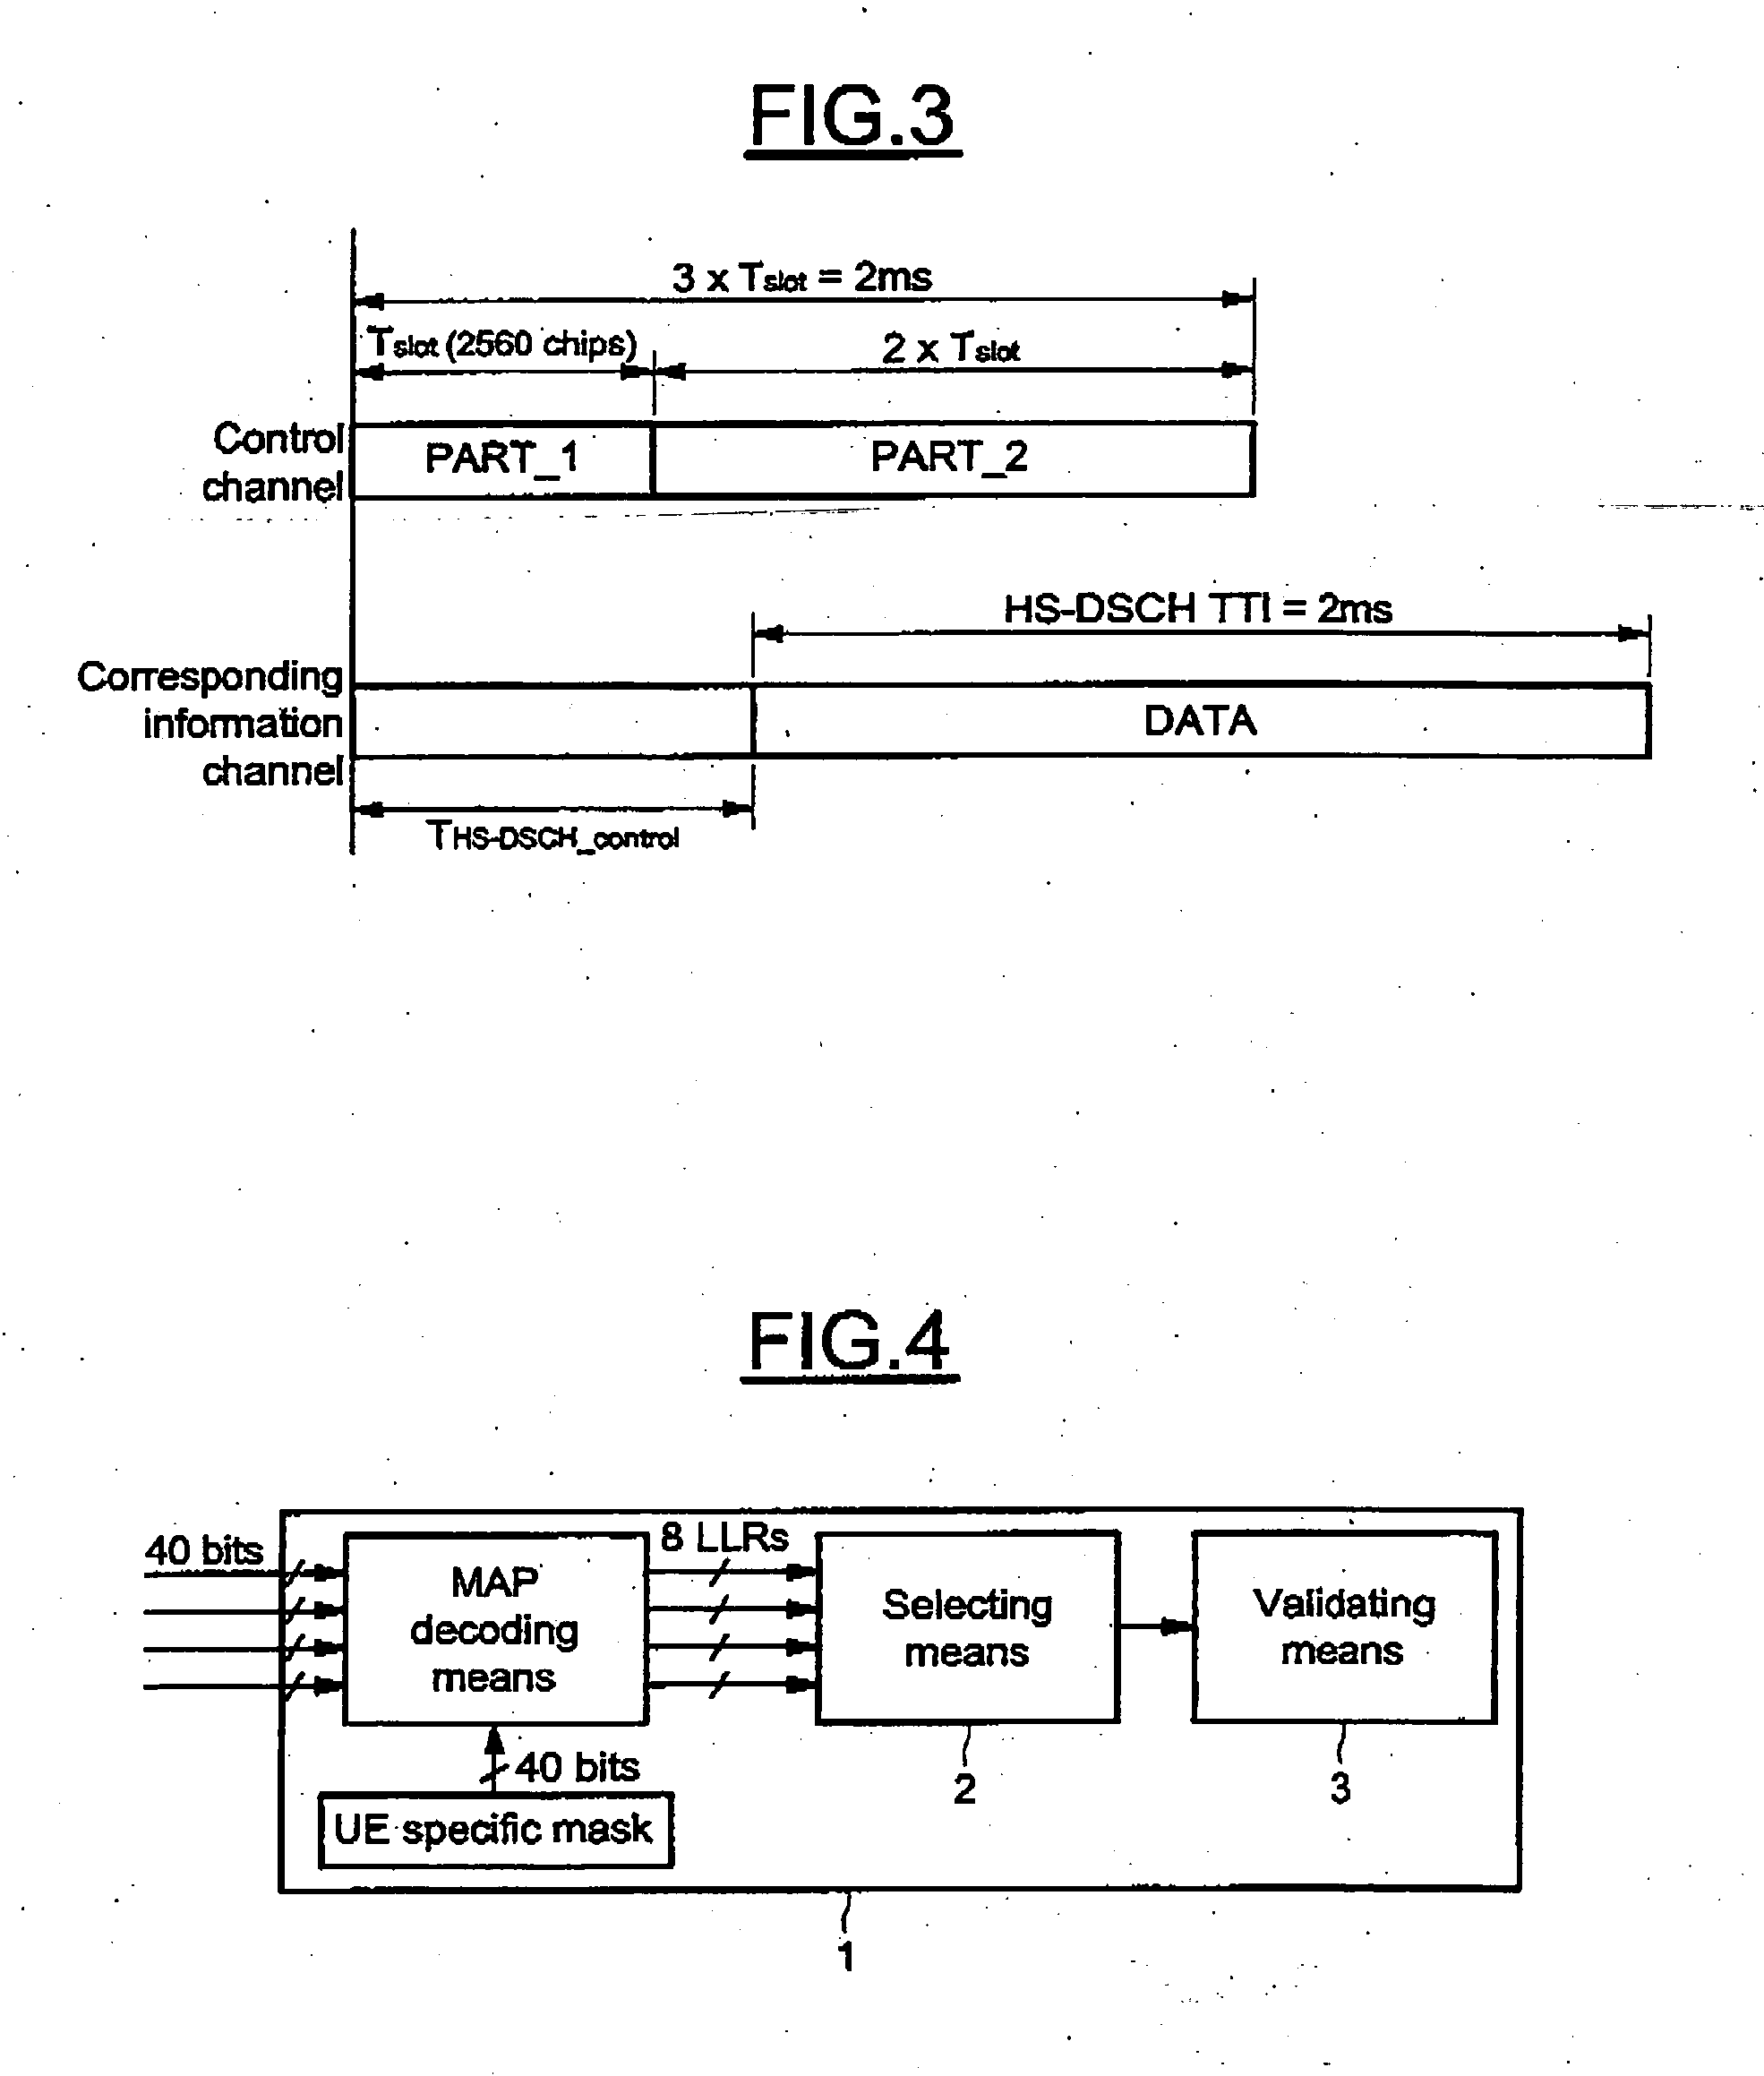 Method and system for blindly detecting a discontinuously transmitted shared channel, in particular blind high speed shared control channels detection